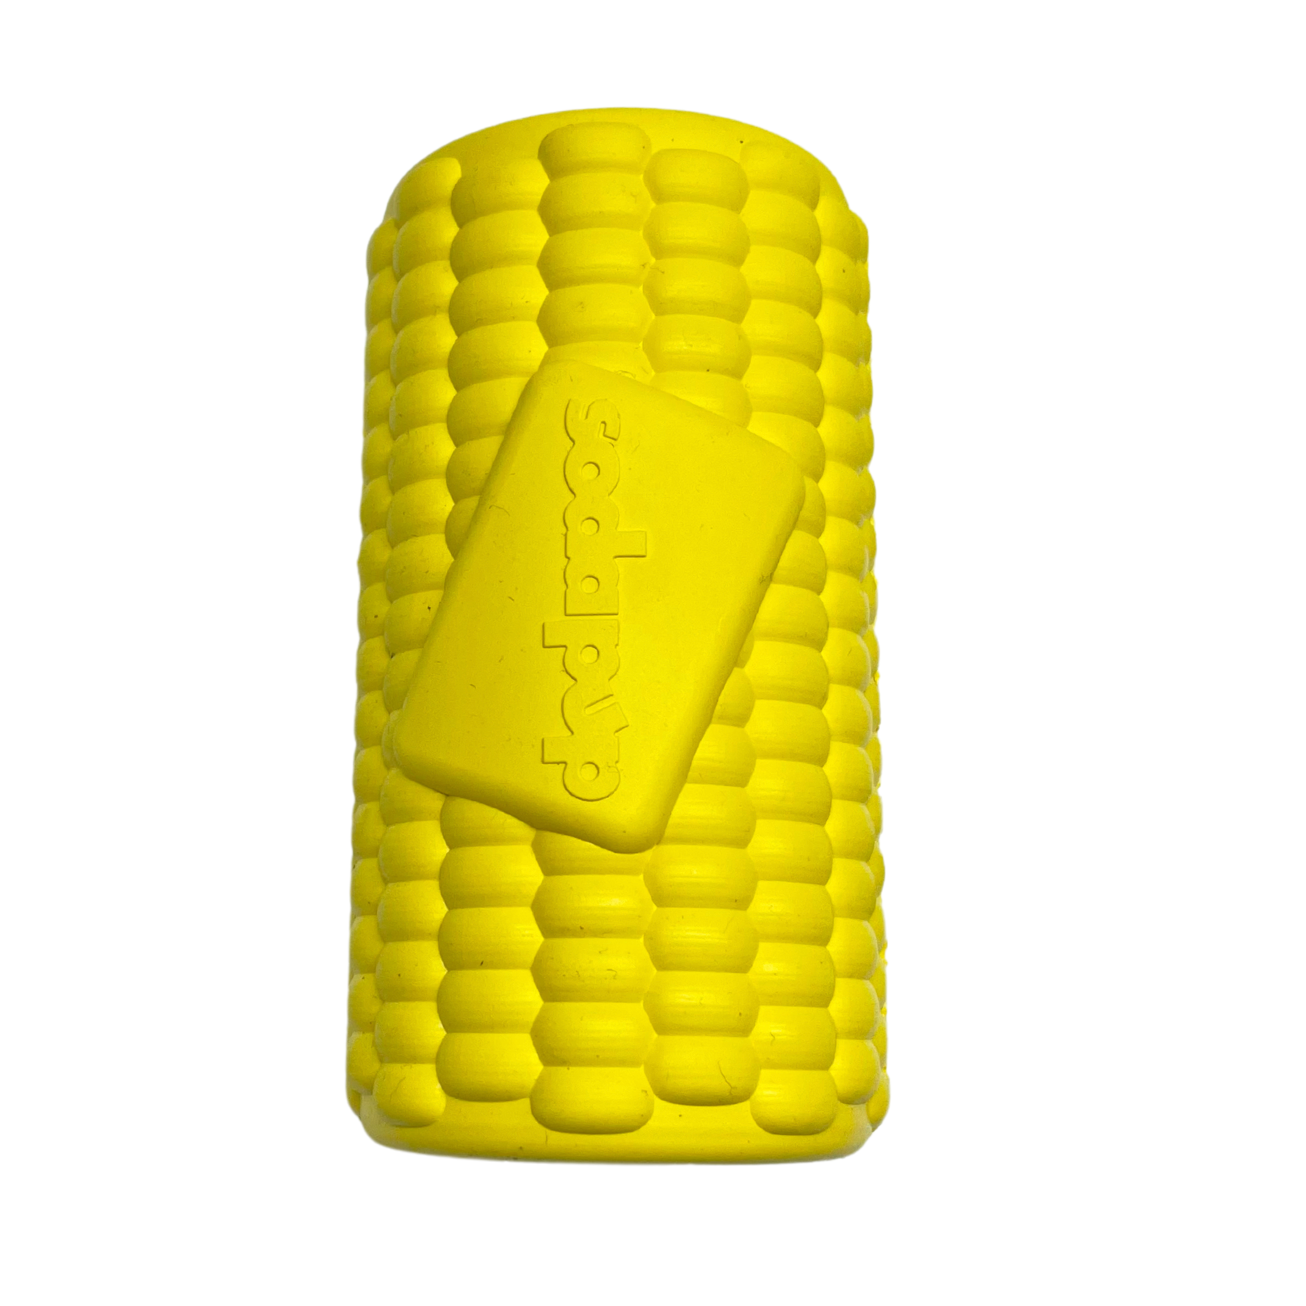 Corn On The Cob from Sodapup Dog Toys. This Dog Chew Toy and Enrichment Toy comes in two sizes.